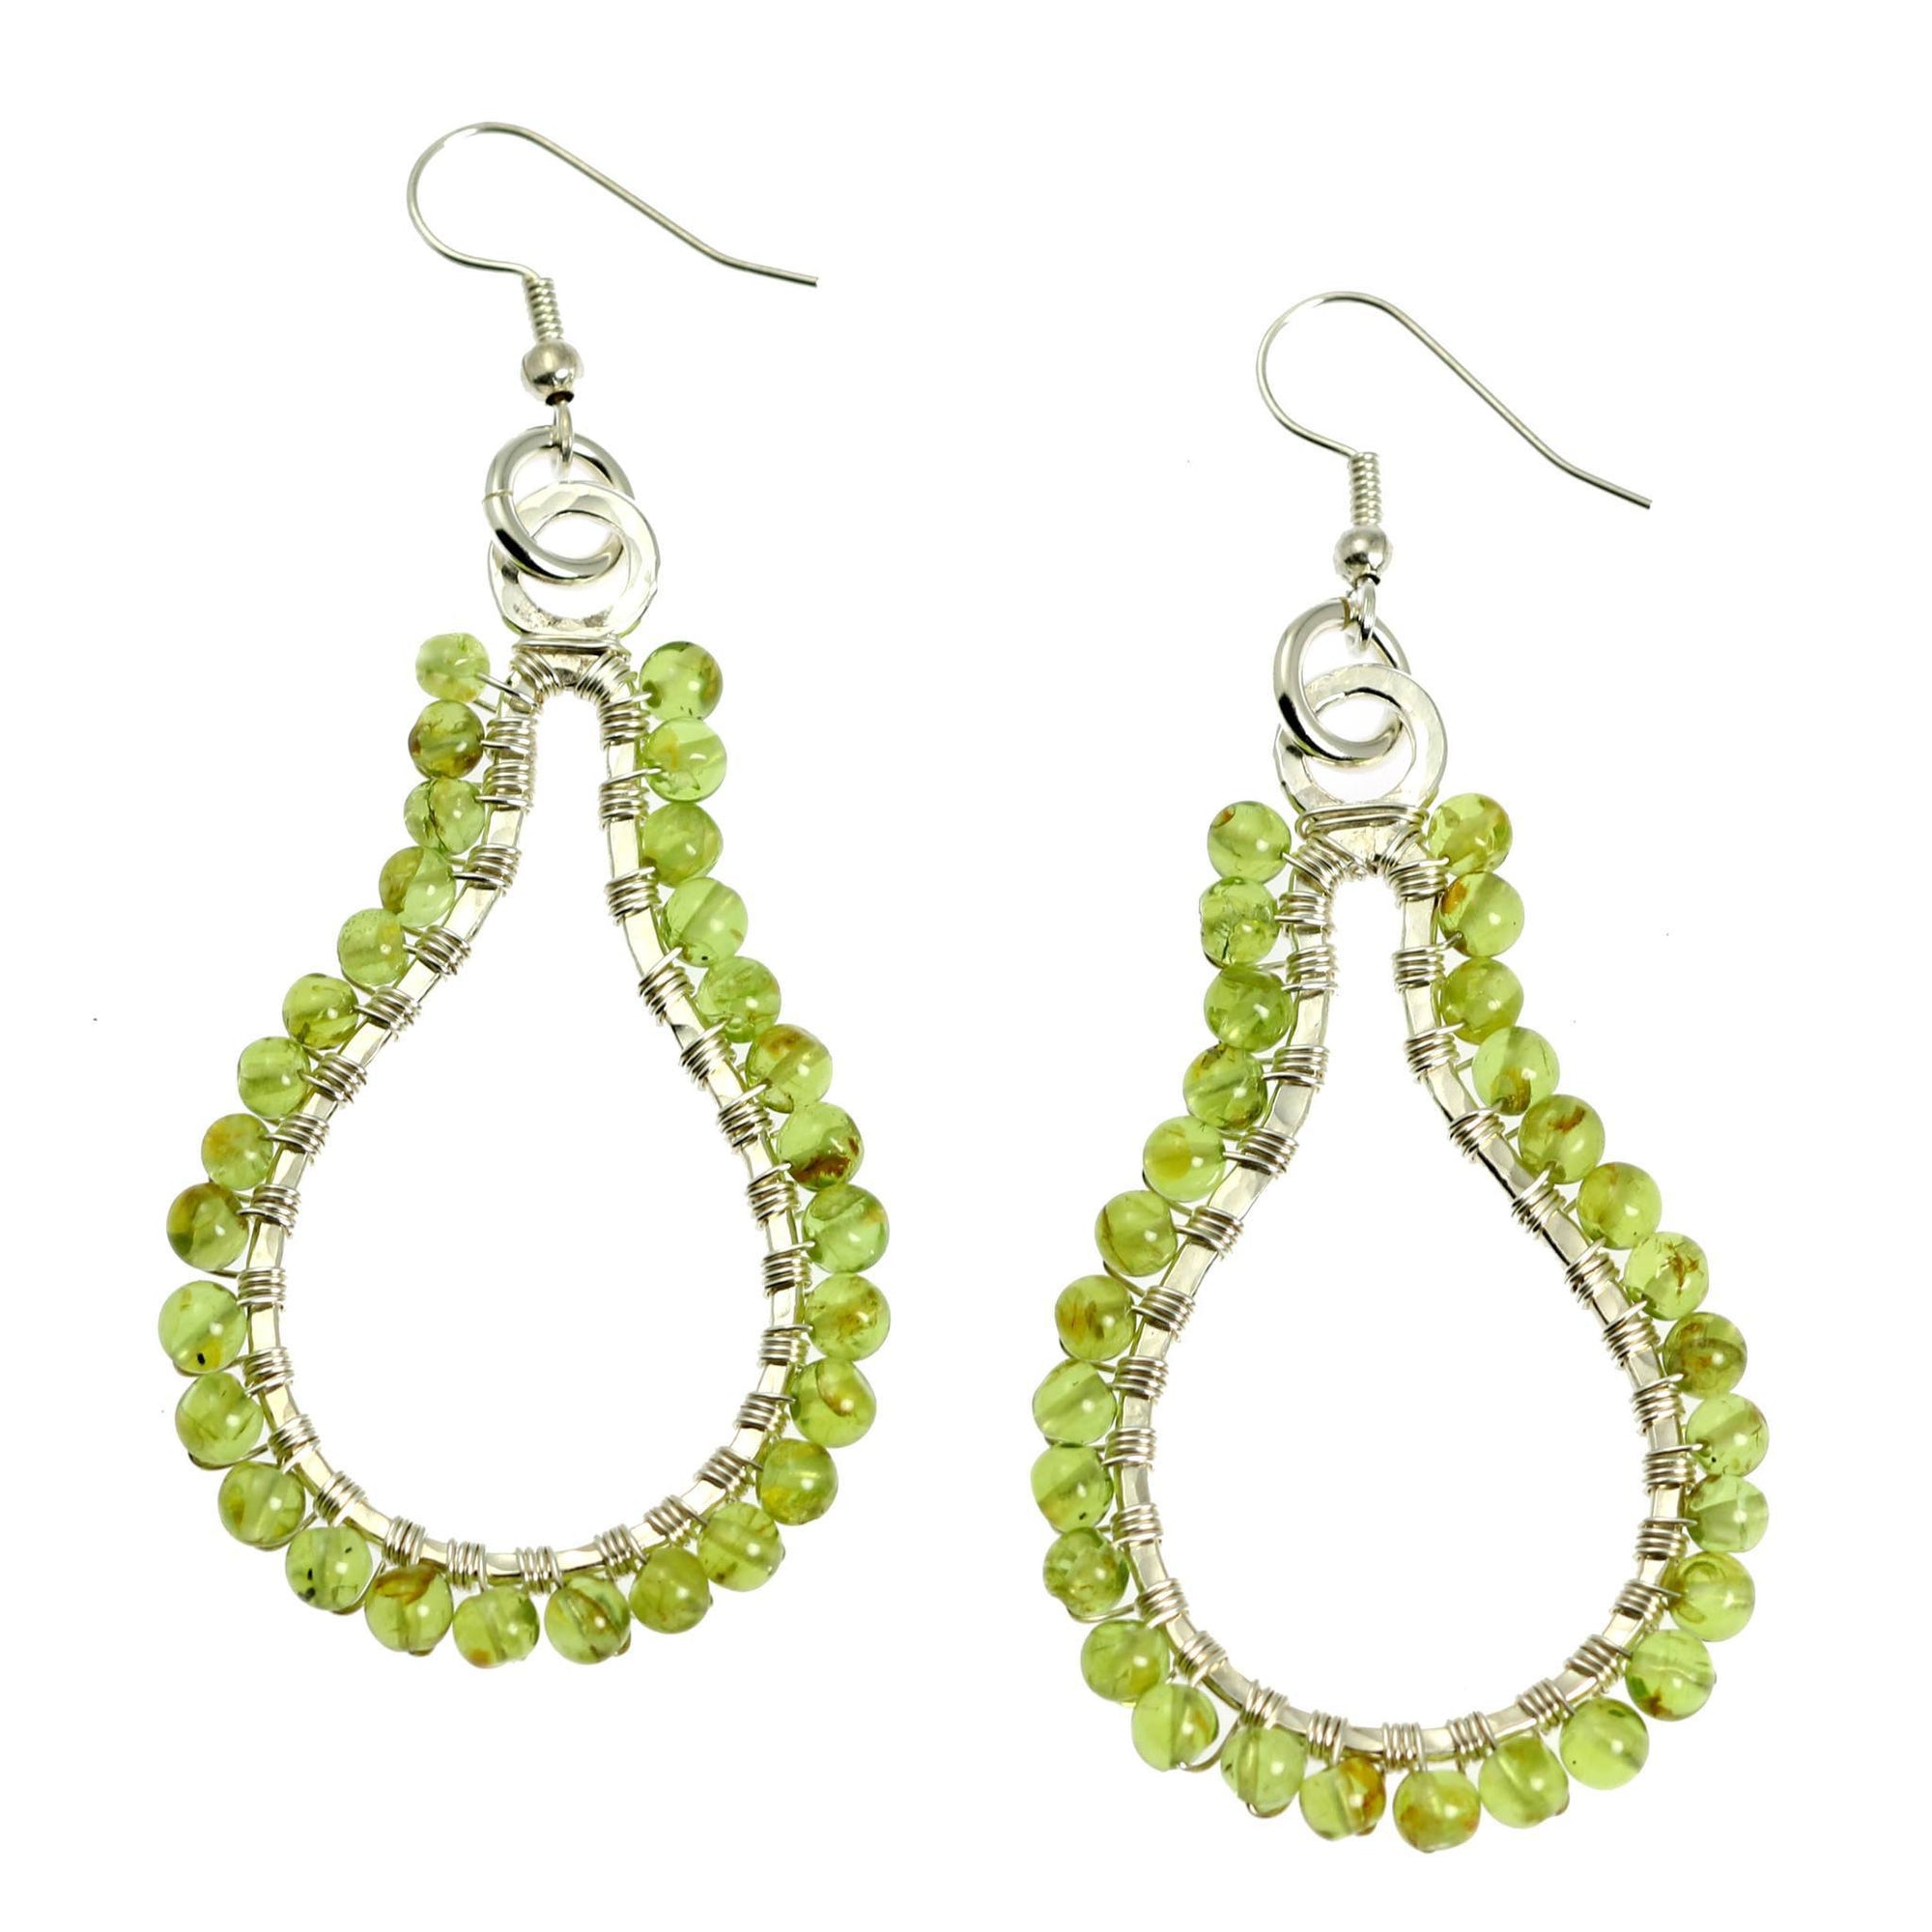 Detail View Hammered Silver Drop Earrings with Peridot